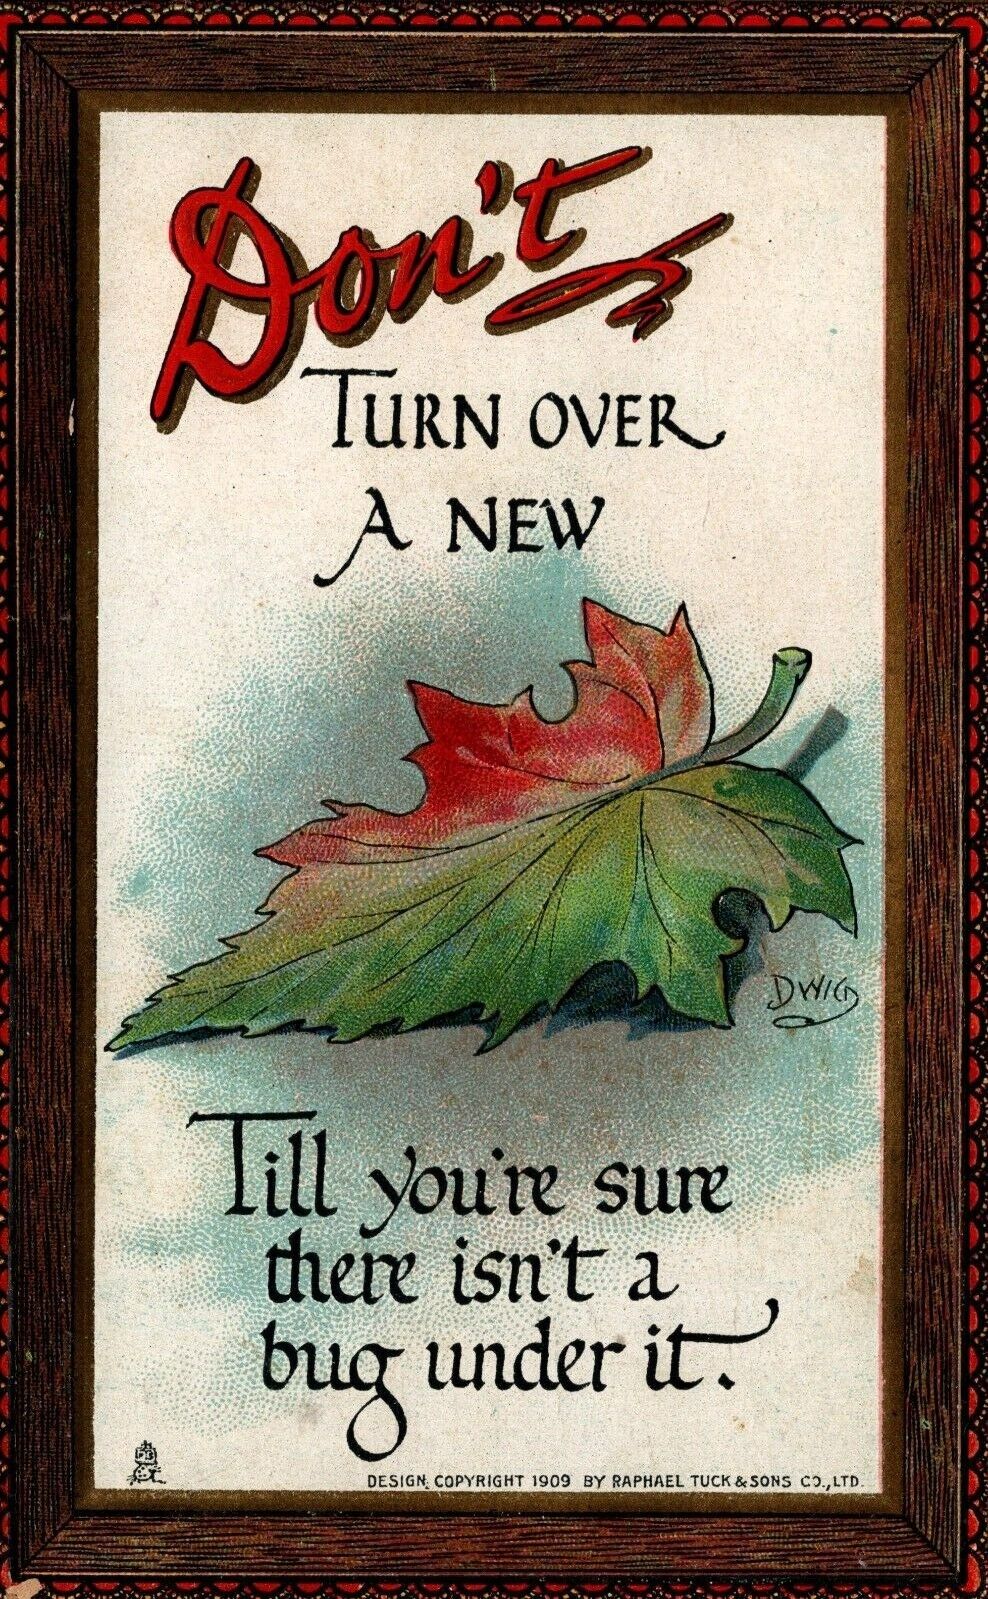 Posted in 1909 Tuck's Postcard Series #165. DON'T TURN OVER A NEW LEAF